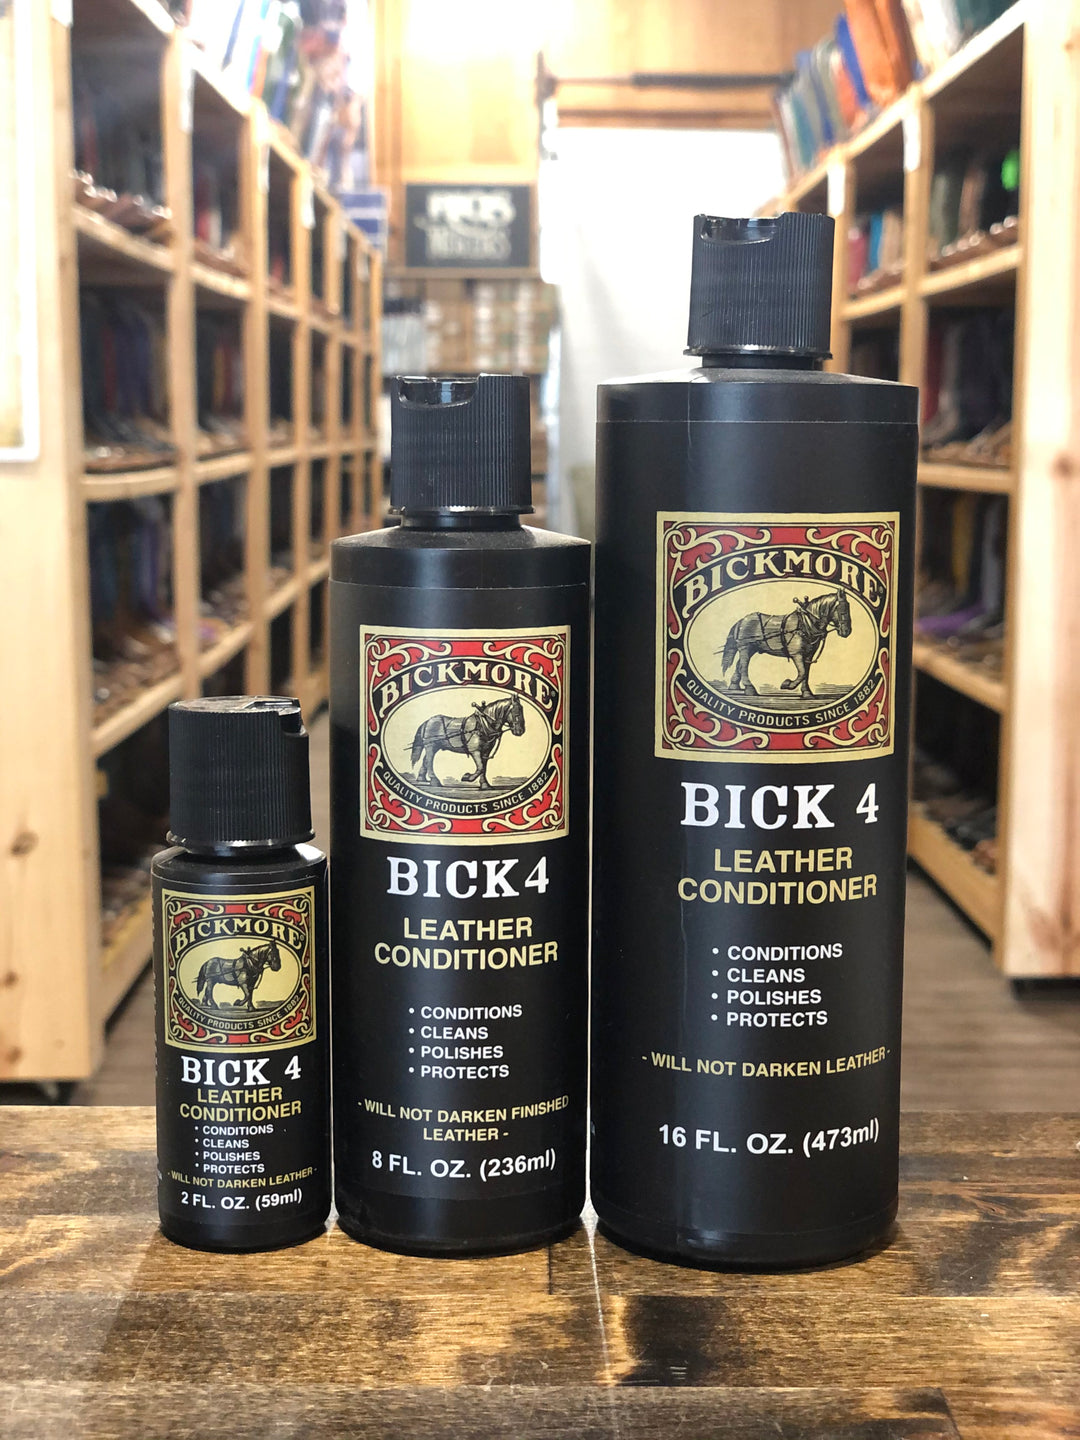 Bickmore Bick 4 Leather Conditioner 16 oz Polish and Protect